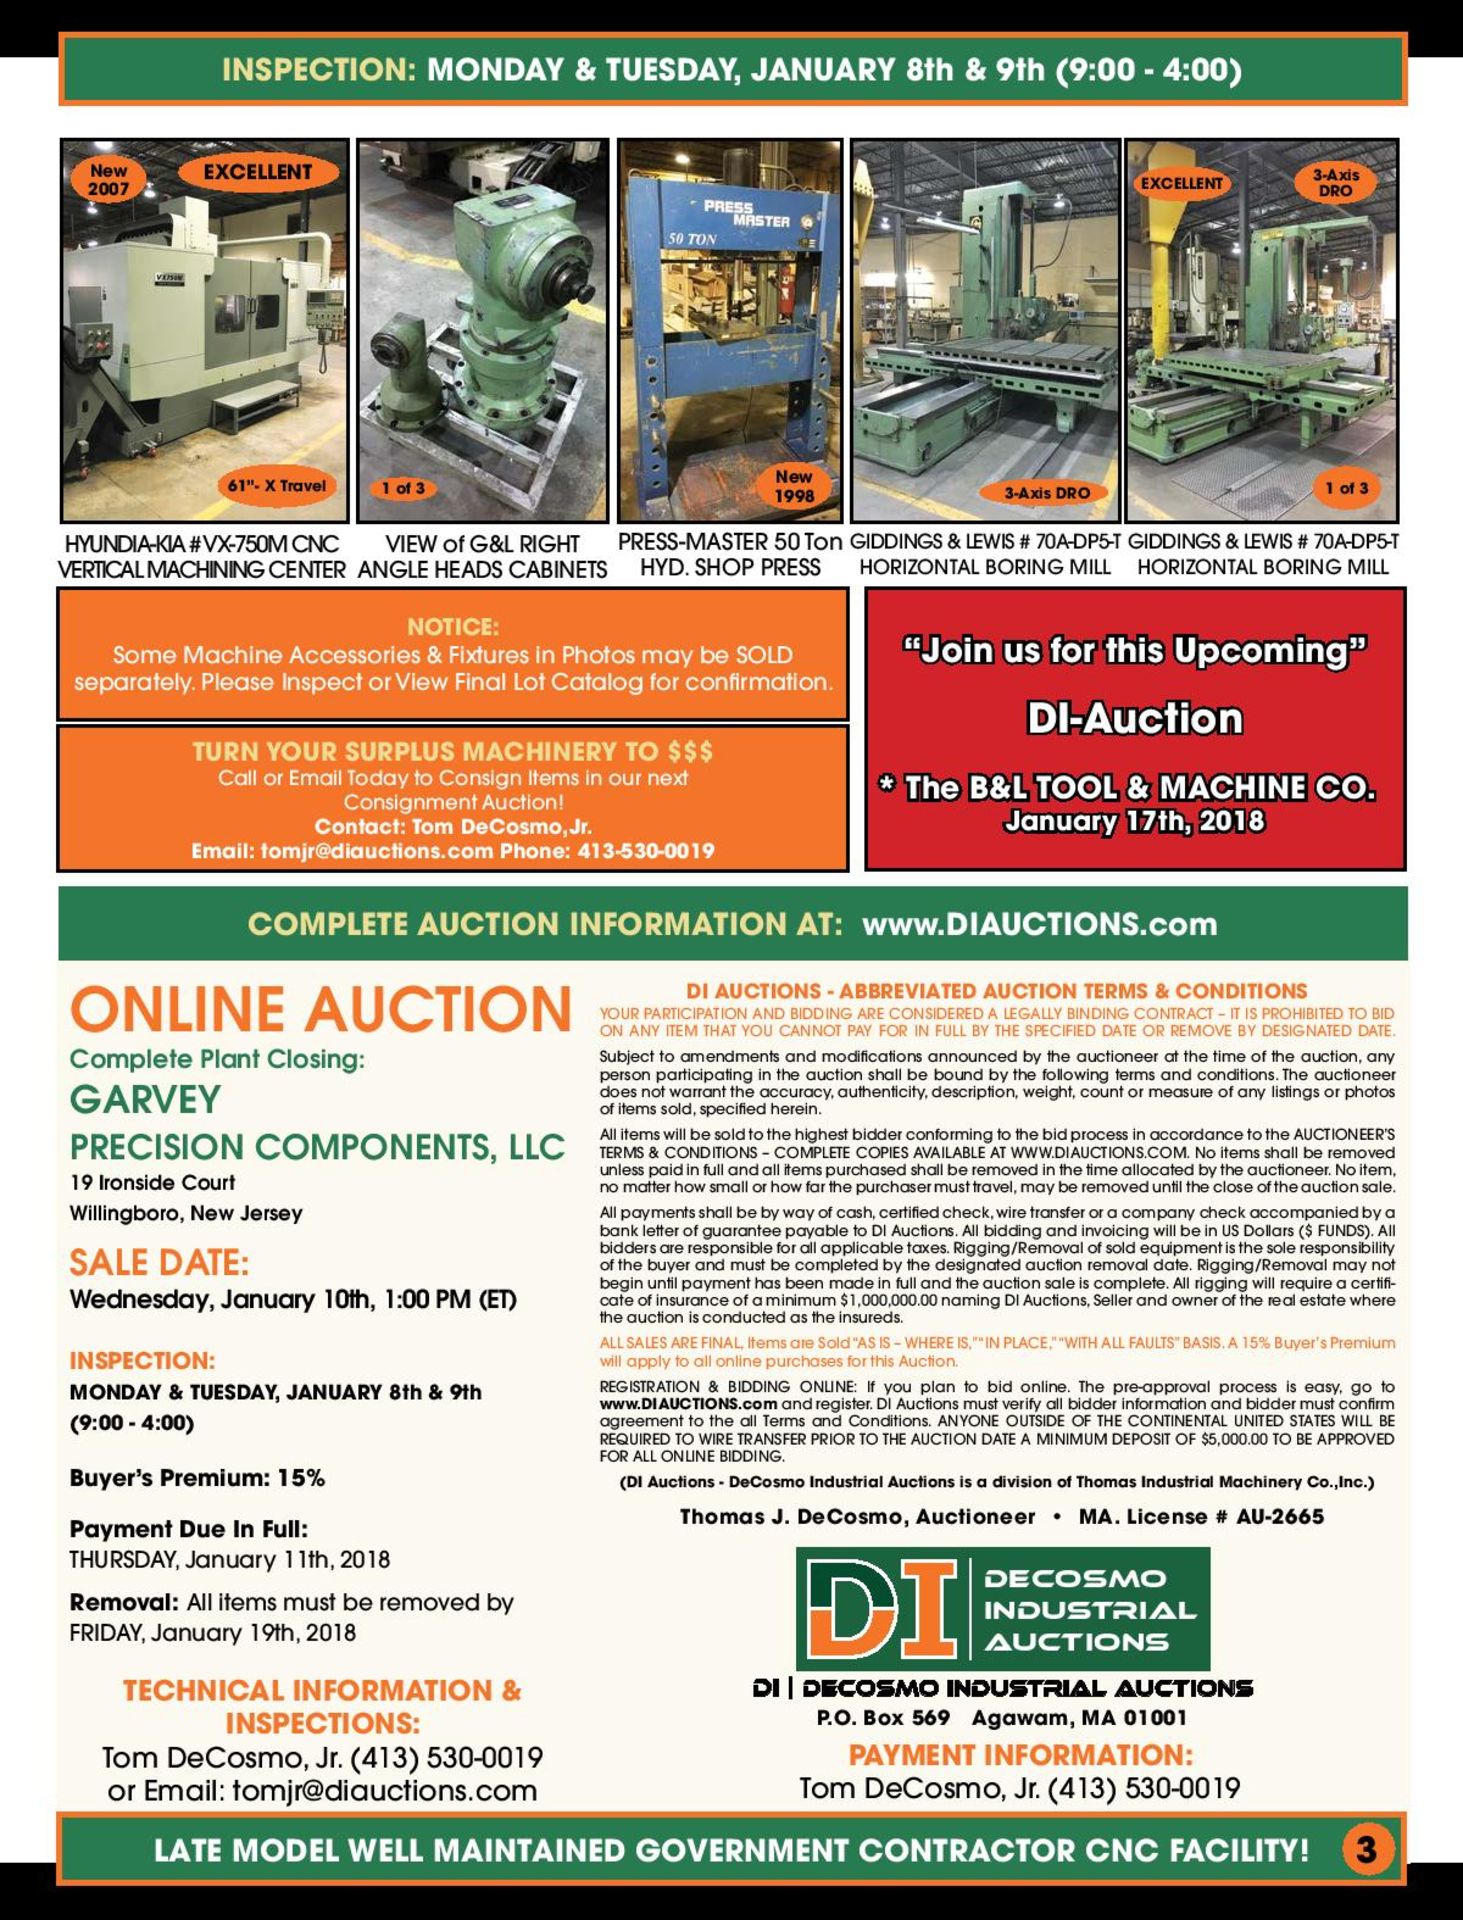 THIS AUCTION IS BEING CONDUCTED ON DeCOSMO INDUSTRIAL AUCTIONS WEBSITE. - Image 3 of 4